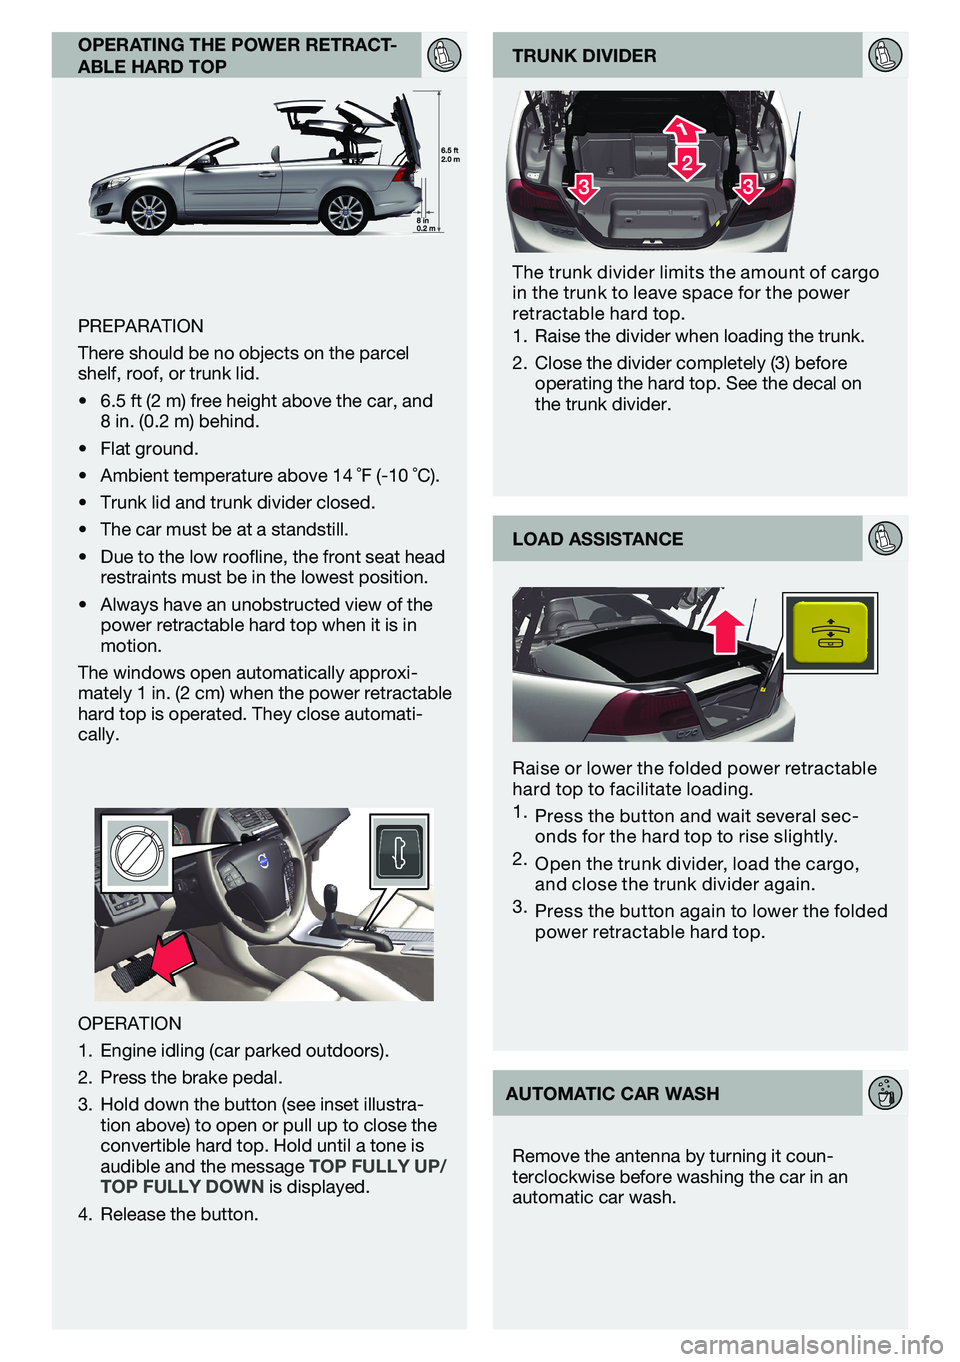 VOLVO C70 2013  Quick Guide operatIng the power retract-
able hard top
PreParatIoN
there should be no objects on the parcel 
shelf, roof, or trunk lid.
•	 6.5 ft (2 m) free height above the car, and 
8 in. (0.2 m) behind.
•	